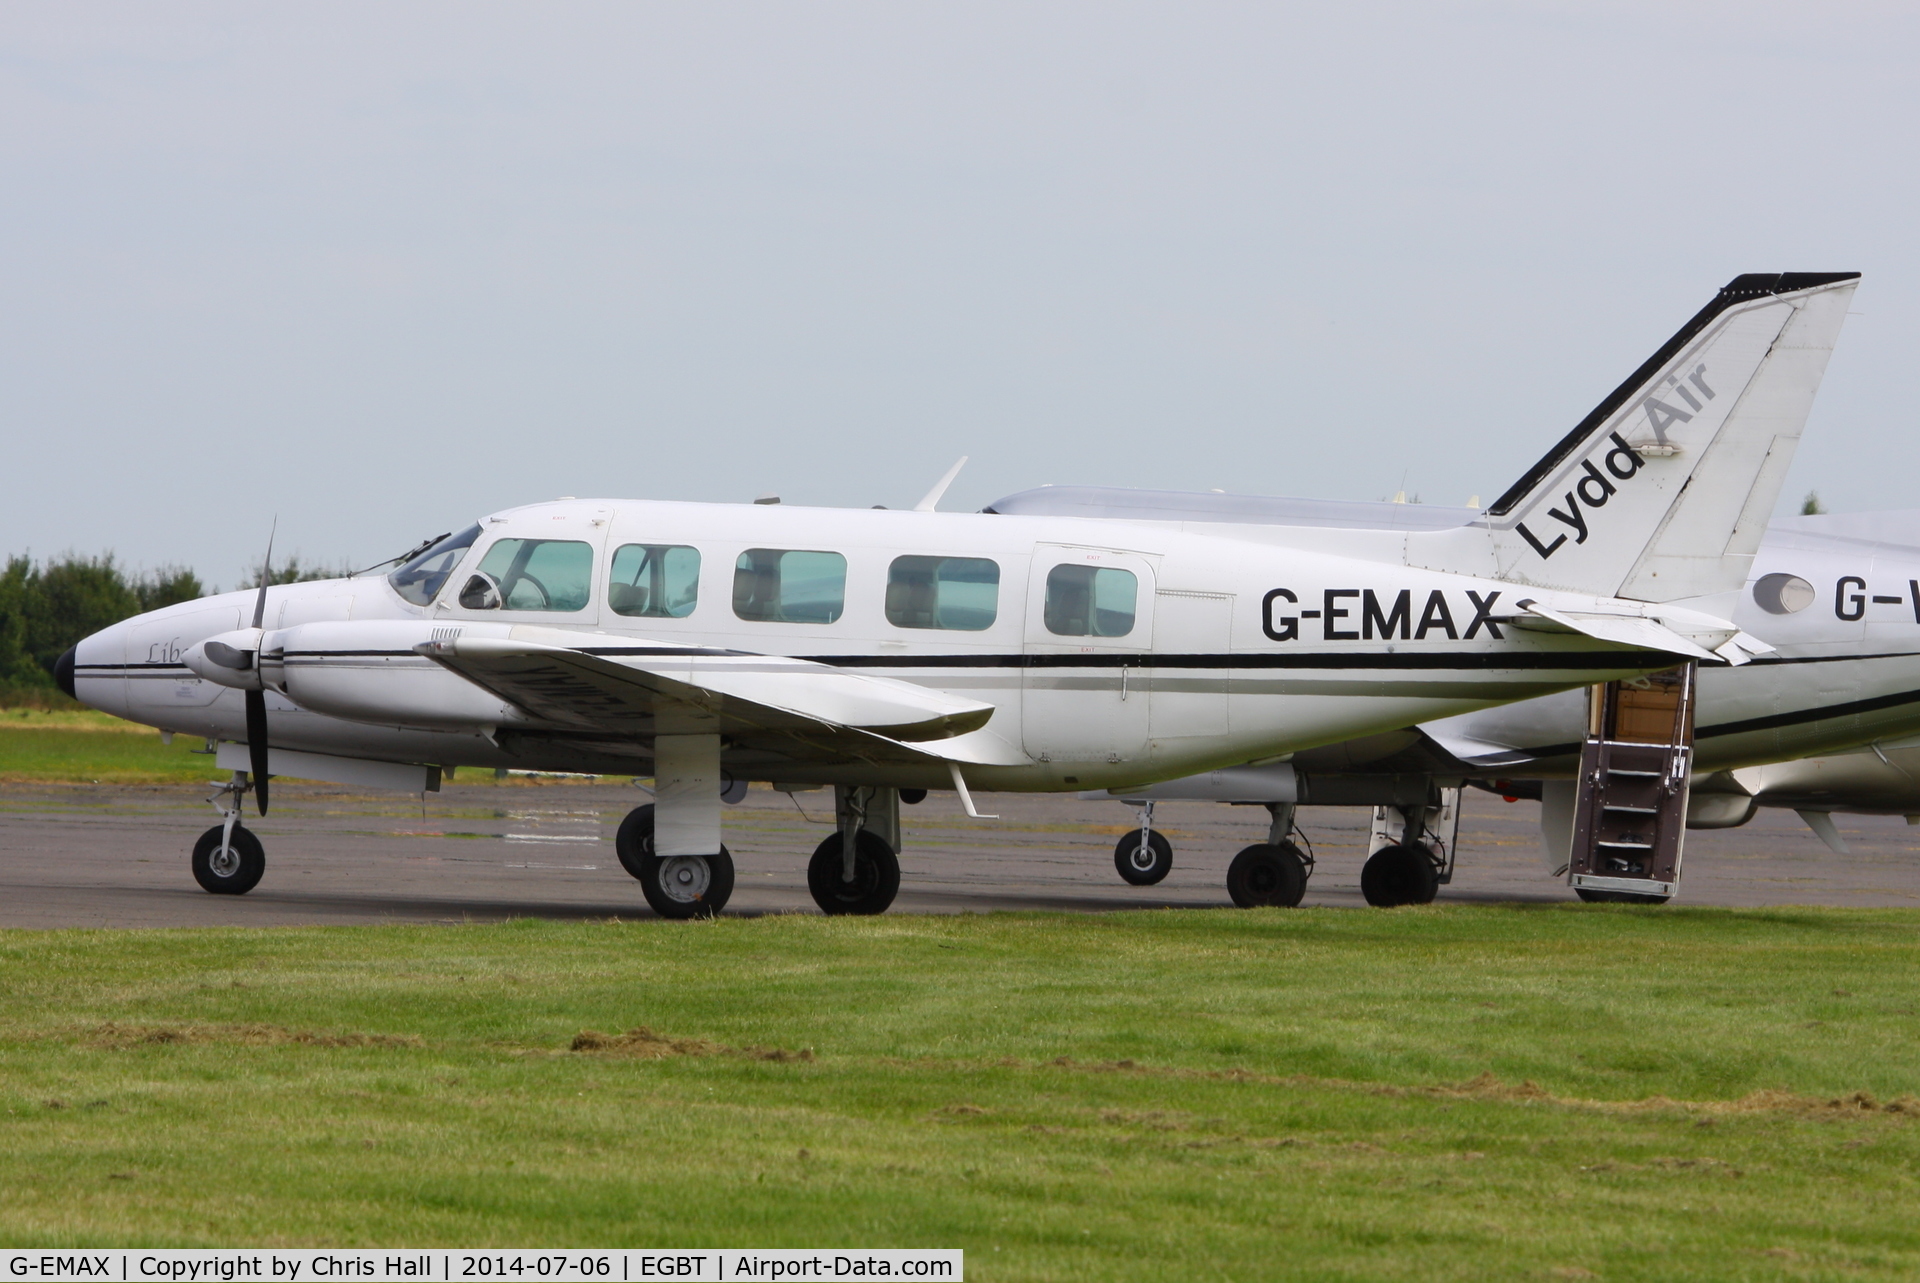 G-EMAX, 1979 Piper PA-31-350 Chieftain C/N 31-7952029, bringing race fans to the British F1 Grand Prix at Silverstone